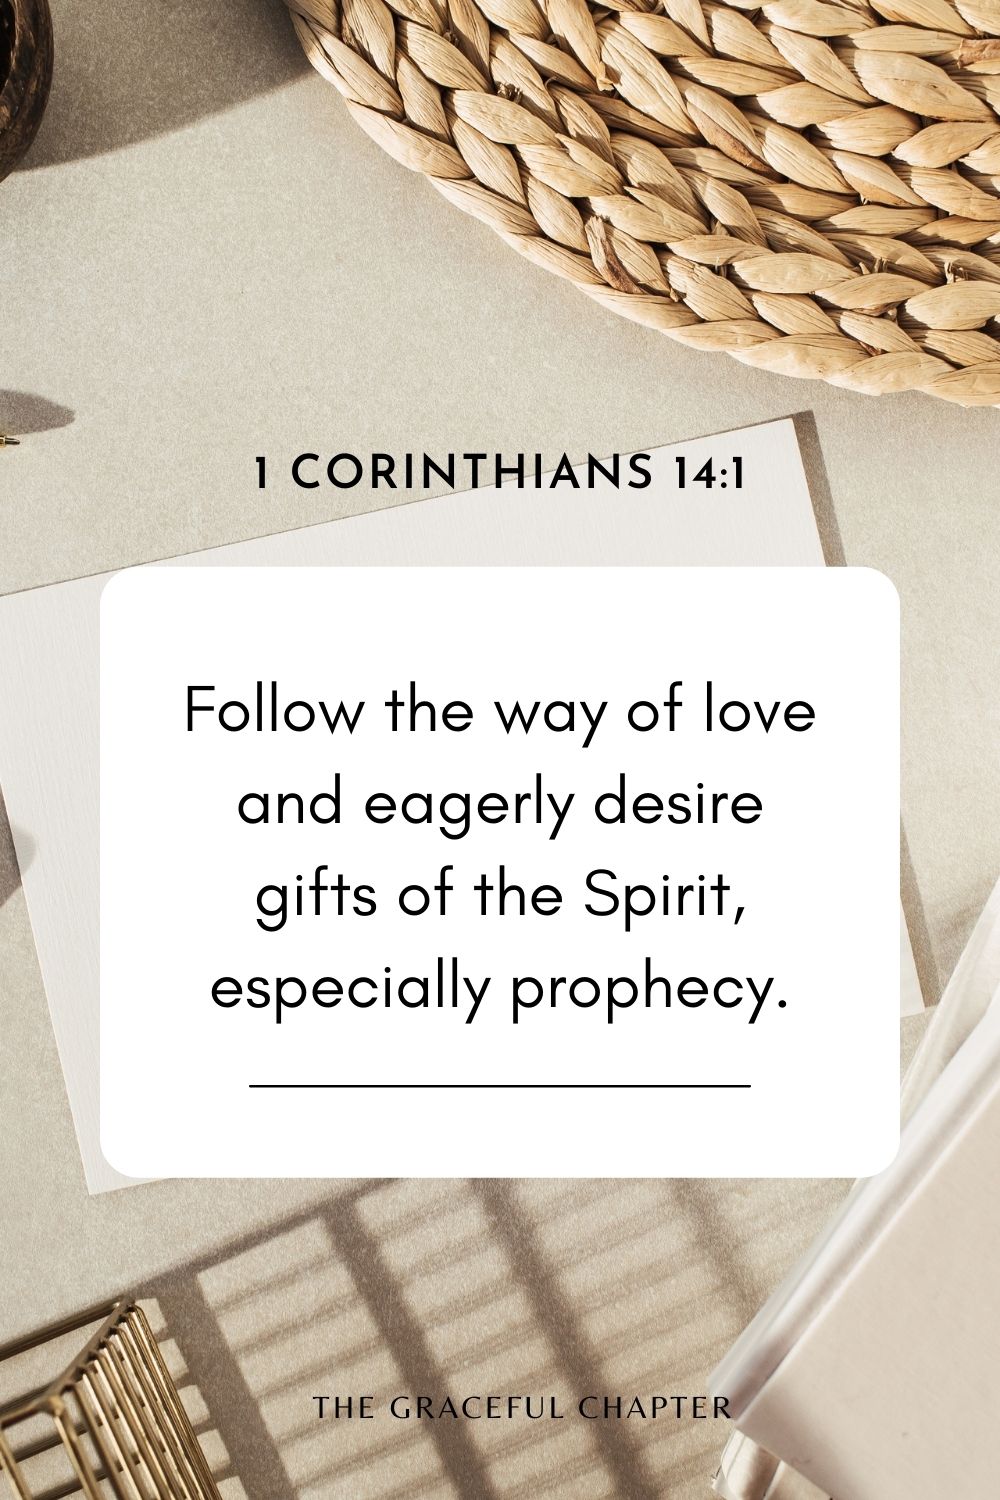 Follow the way of love and eagerly desire gifts of the Spirit, especially prophecy. 1 Corinthians 14:1